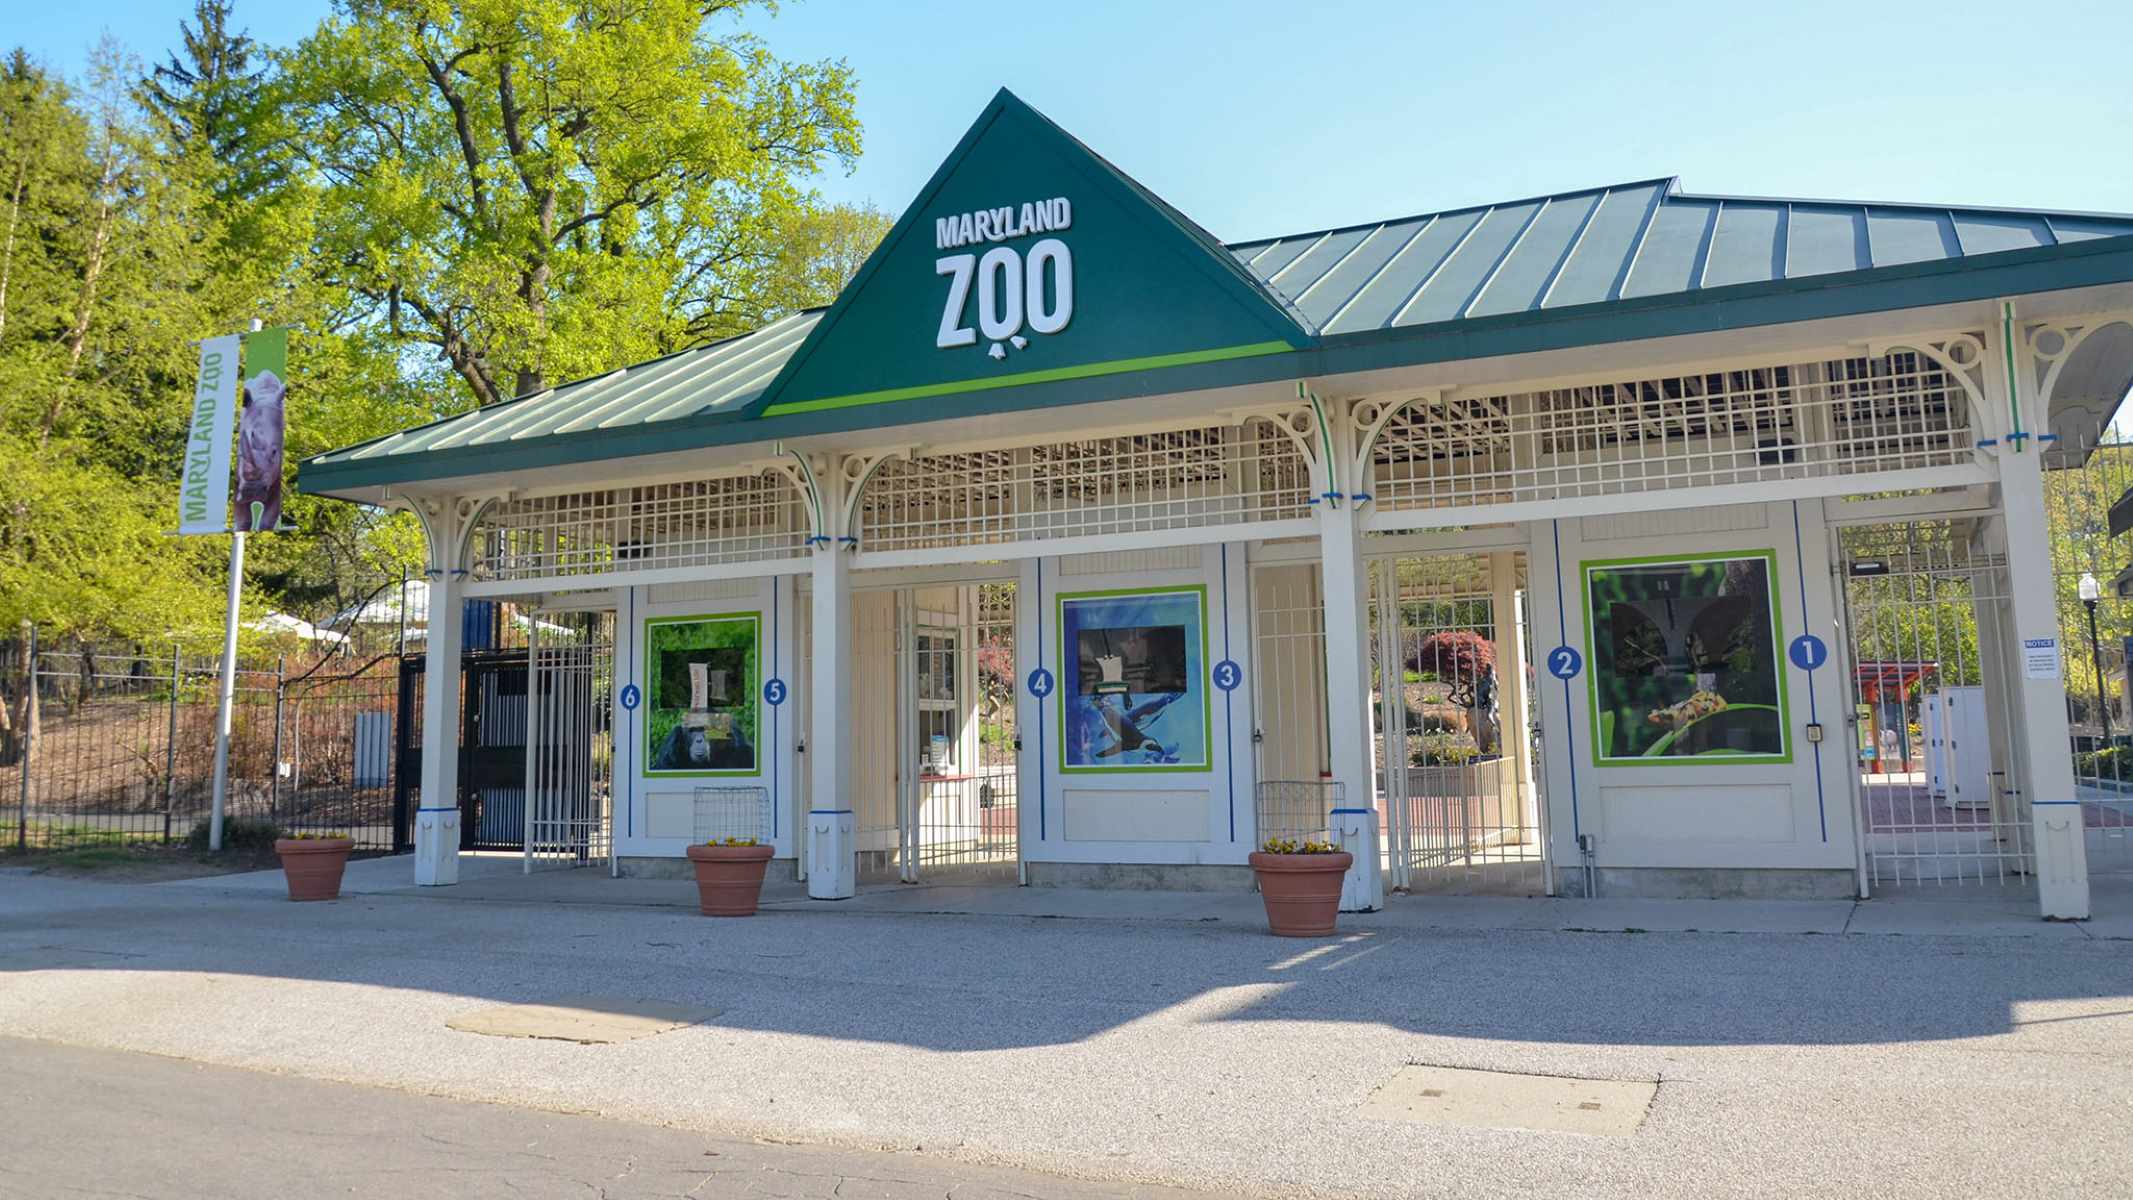 17-extraordinary-facts-about-maryland-zoo